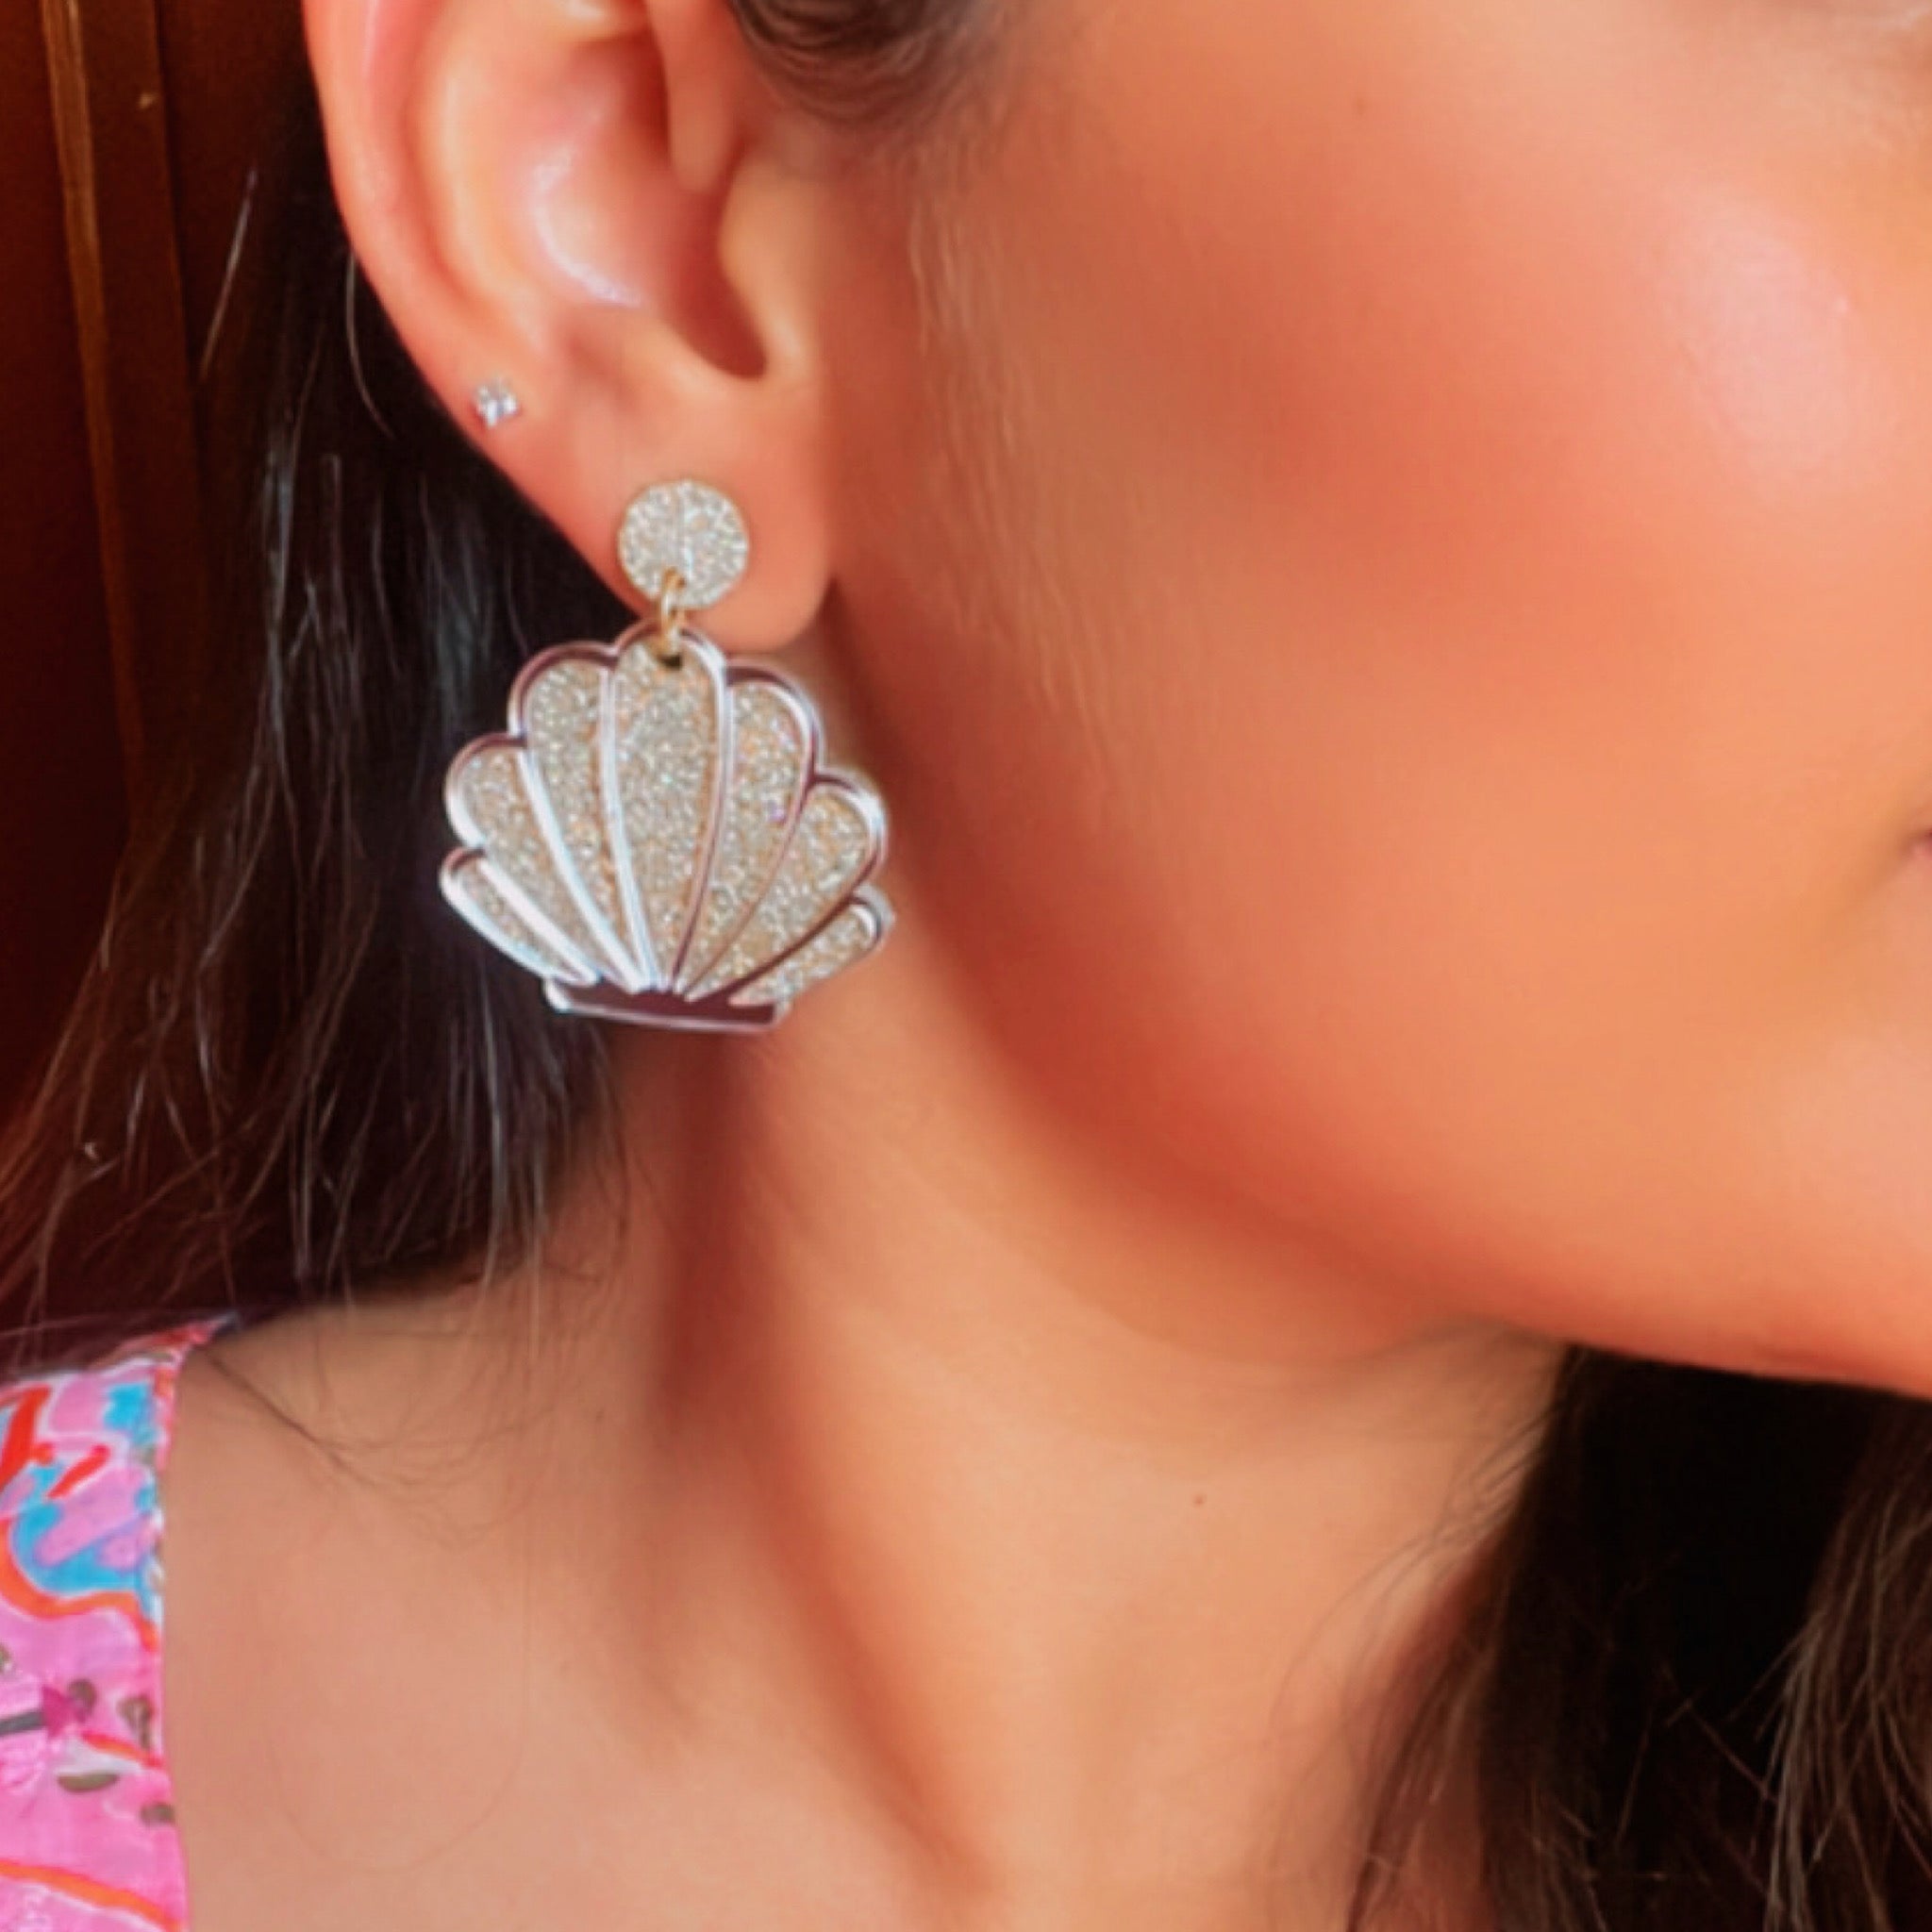 Shiny Shell Earrings - Nian by Nidhi - Shimmer Golden and Glassy Silver - worn by a girl